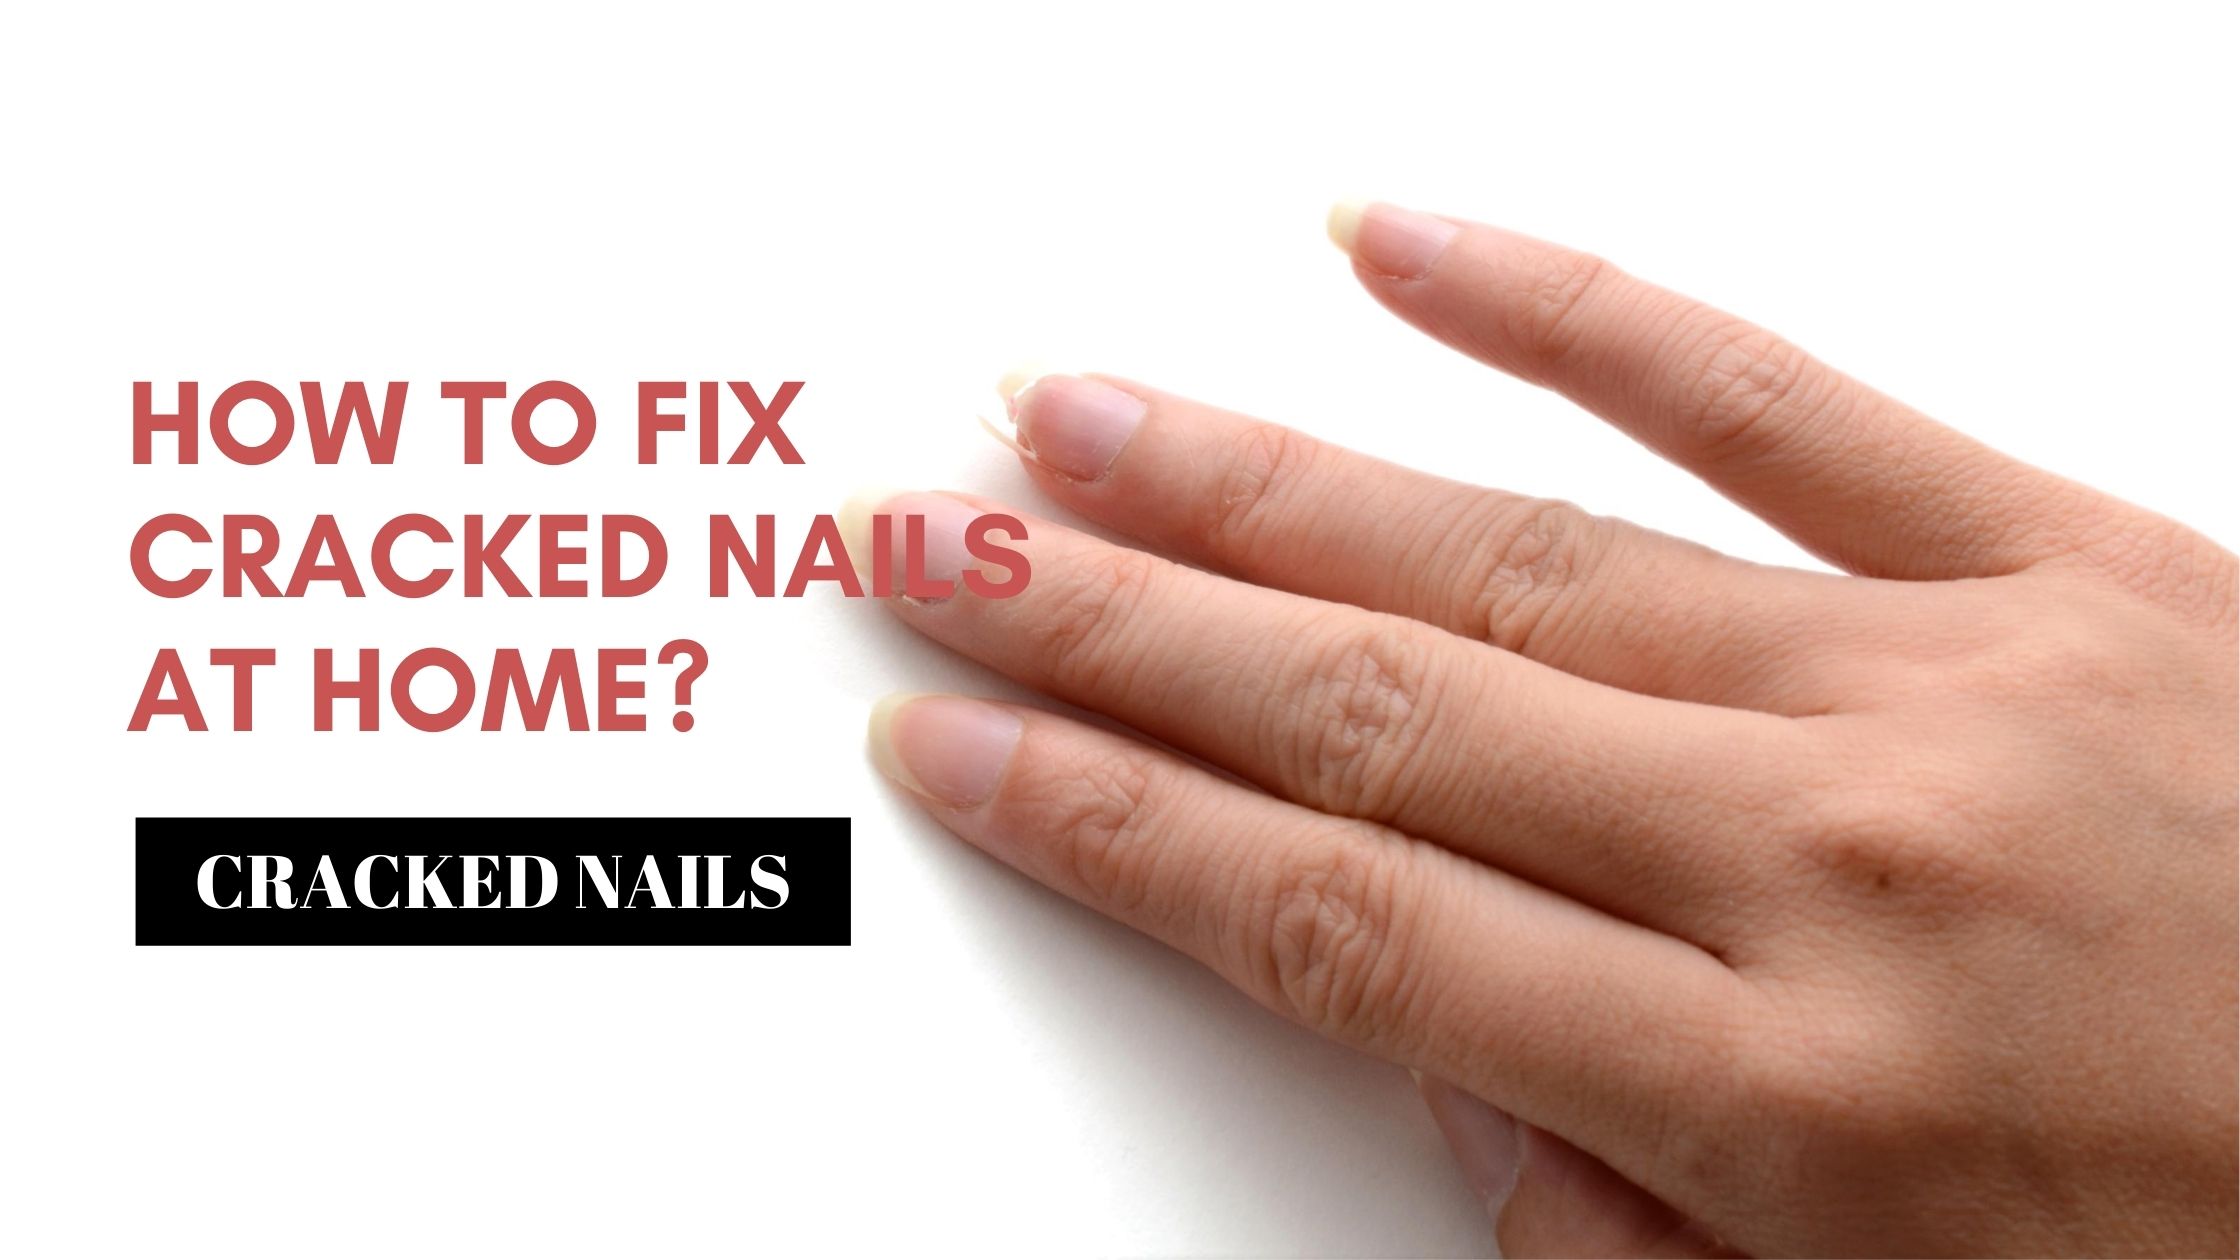 How to Fix Cracked Nails at Home?